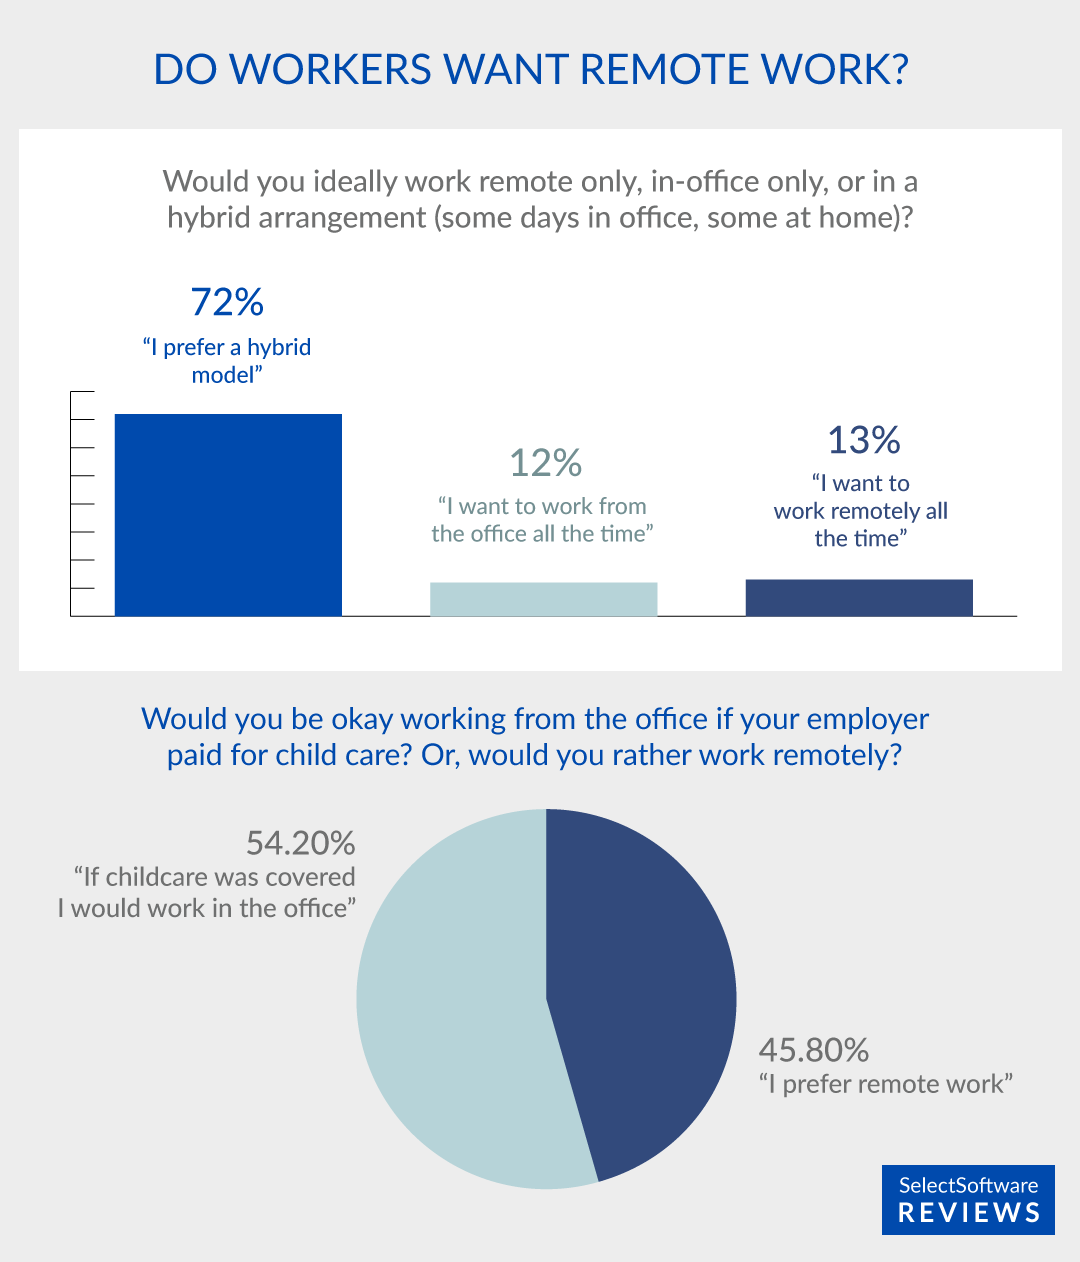 Survey responses about remote or in-office work preferences.